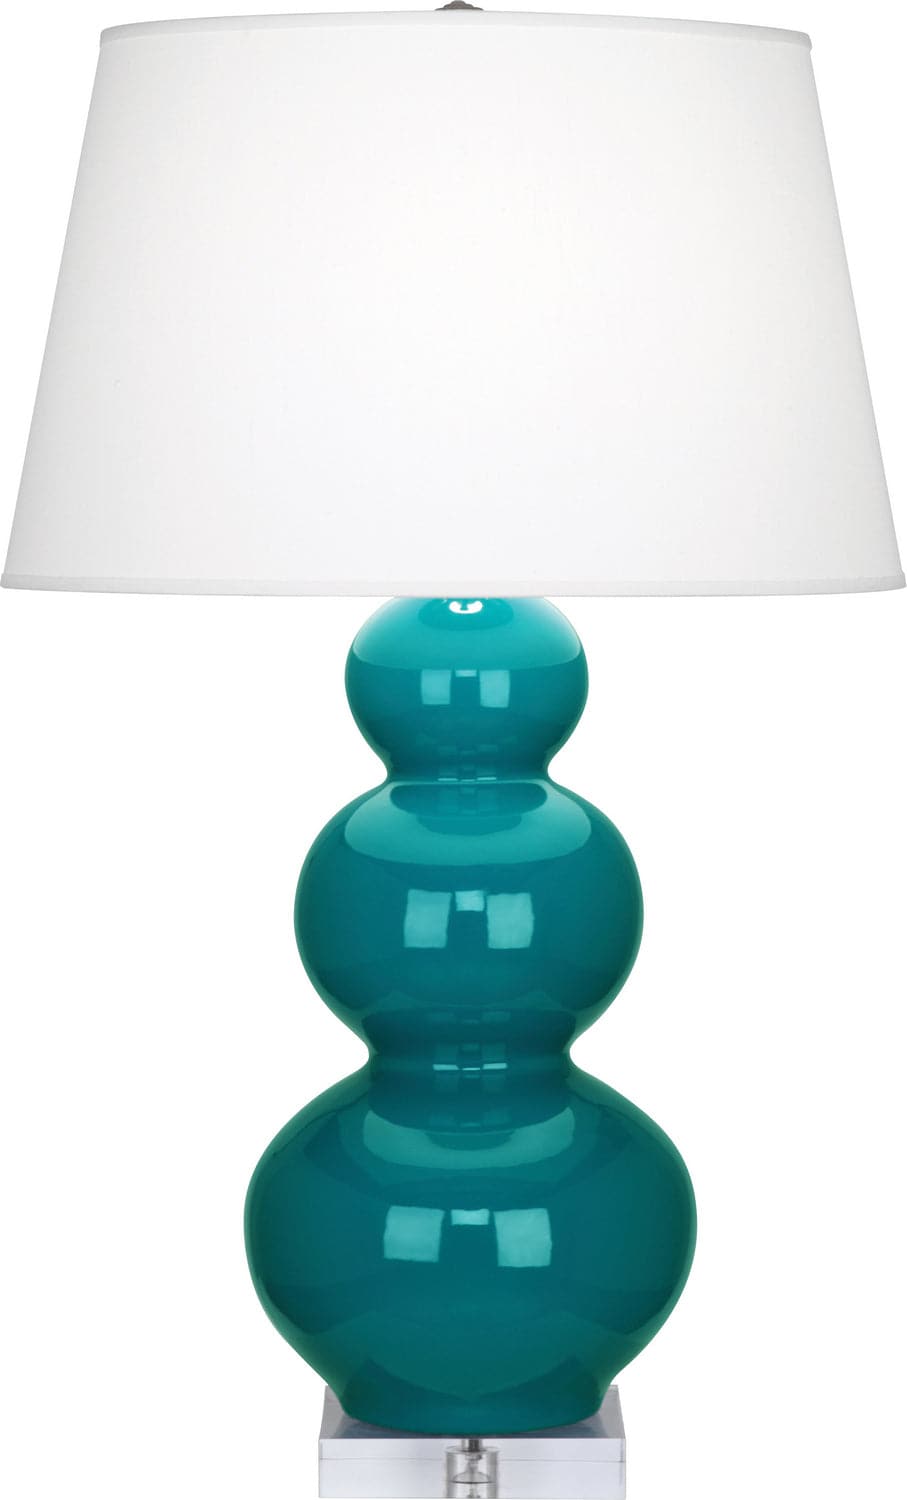 Robert Abbey - A363X - One Light Table Lamp - Triple Gourd - Peacock Glazed w/Lucite Base